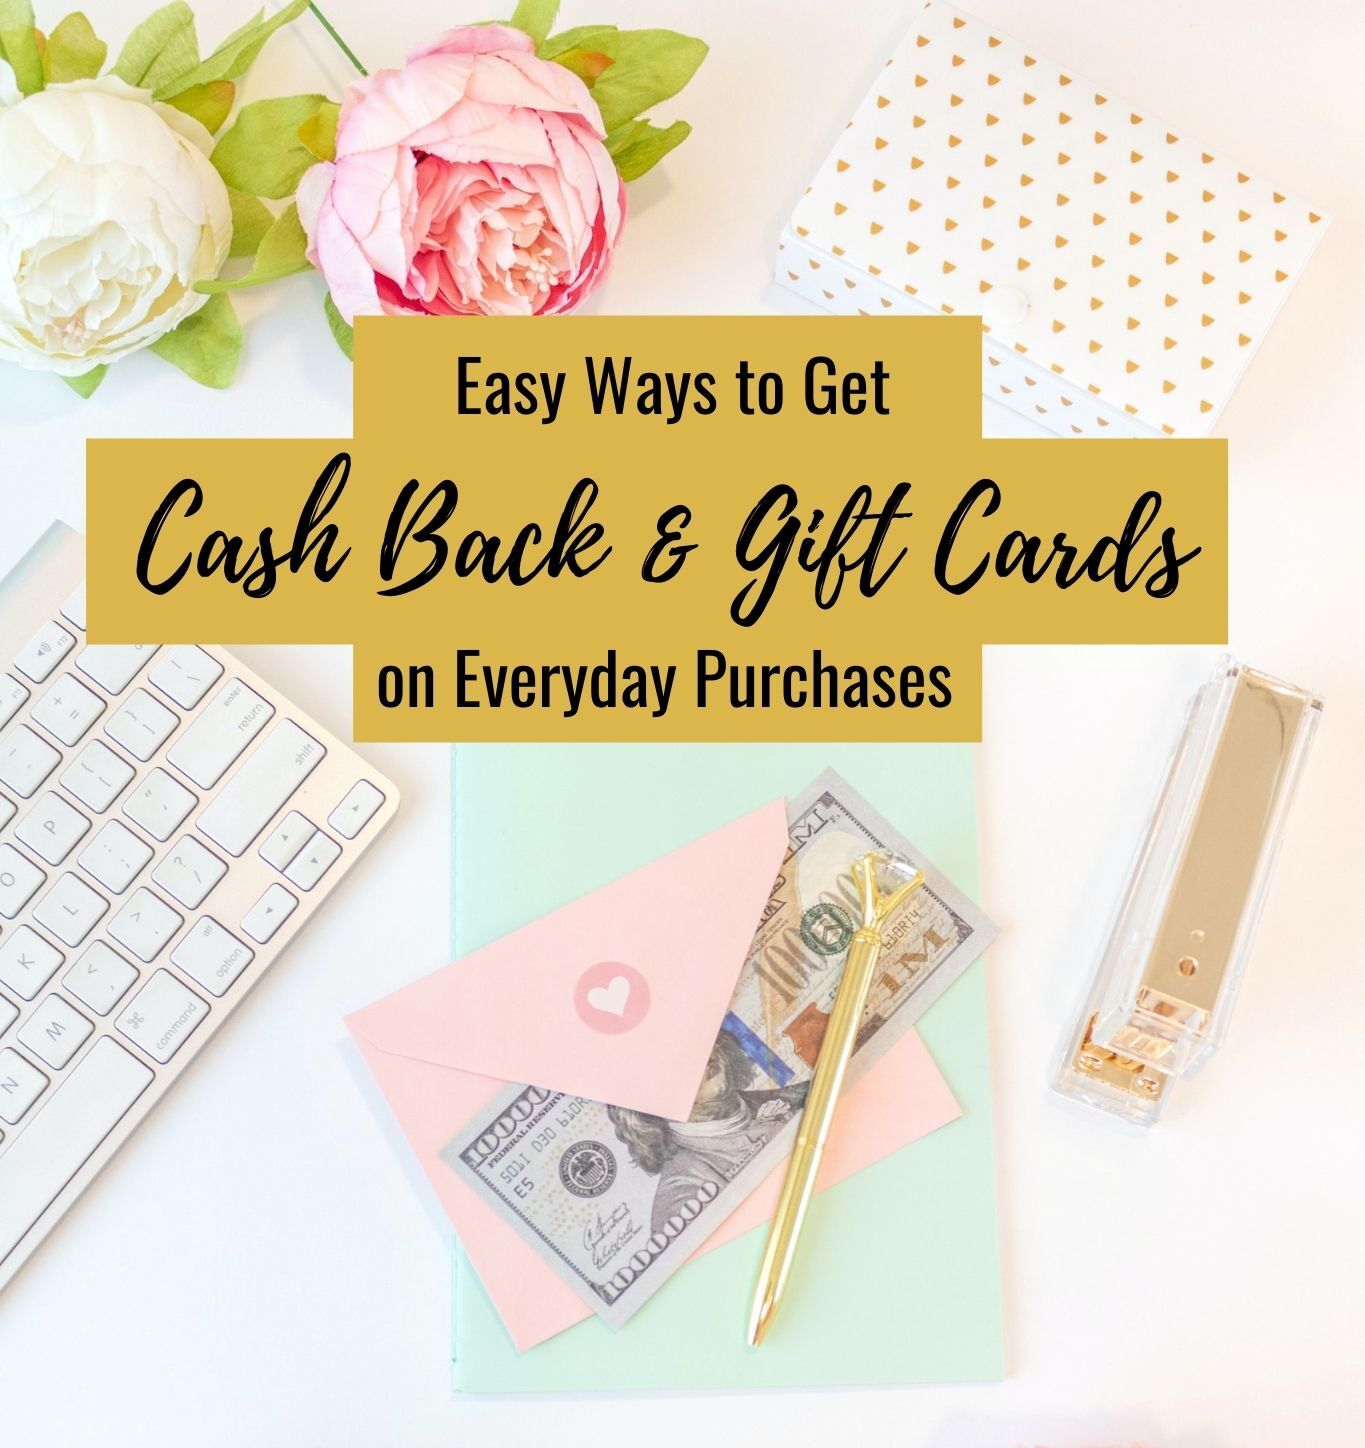 Easy Ways to Get Cash Back on Everyday Purchases